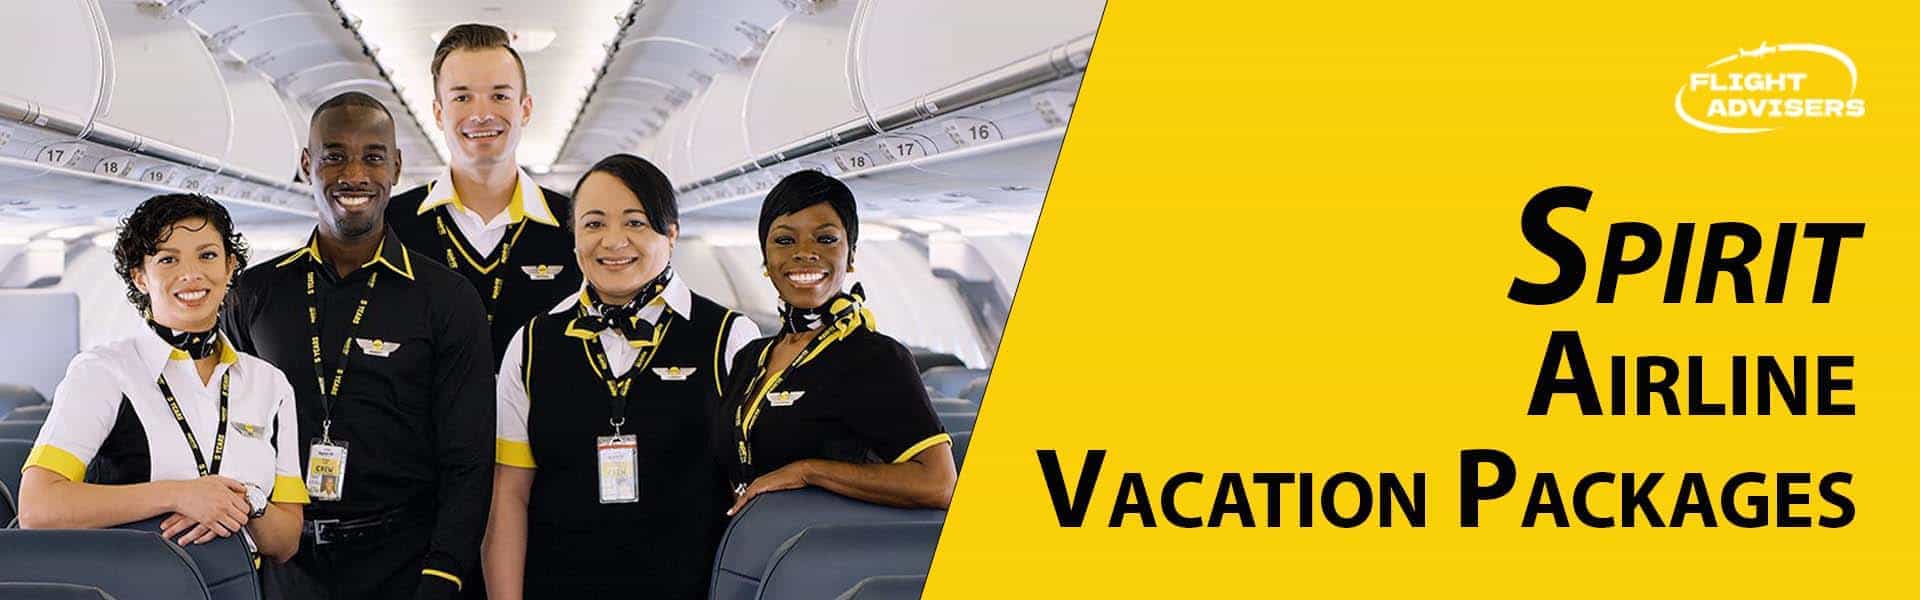 spirit-airlines-vacation-packages